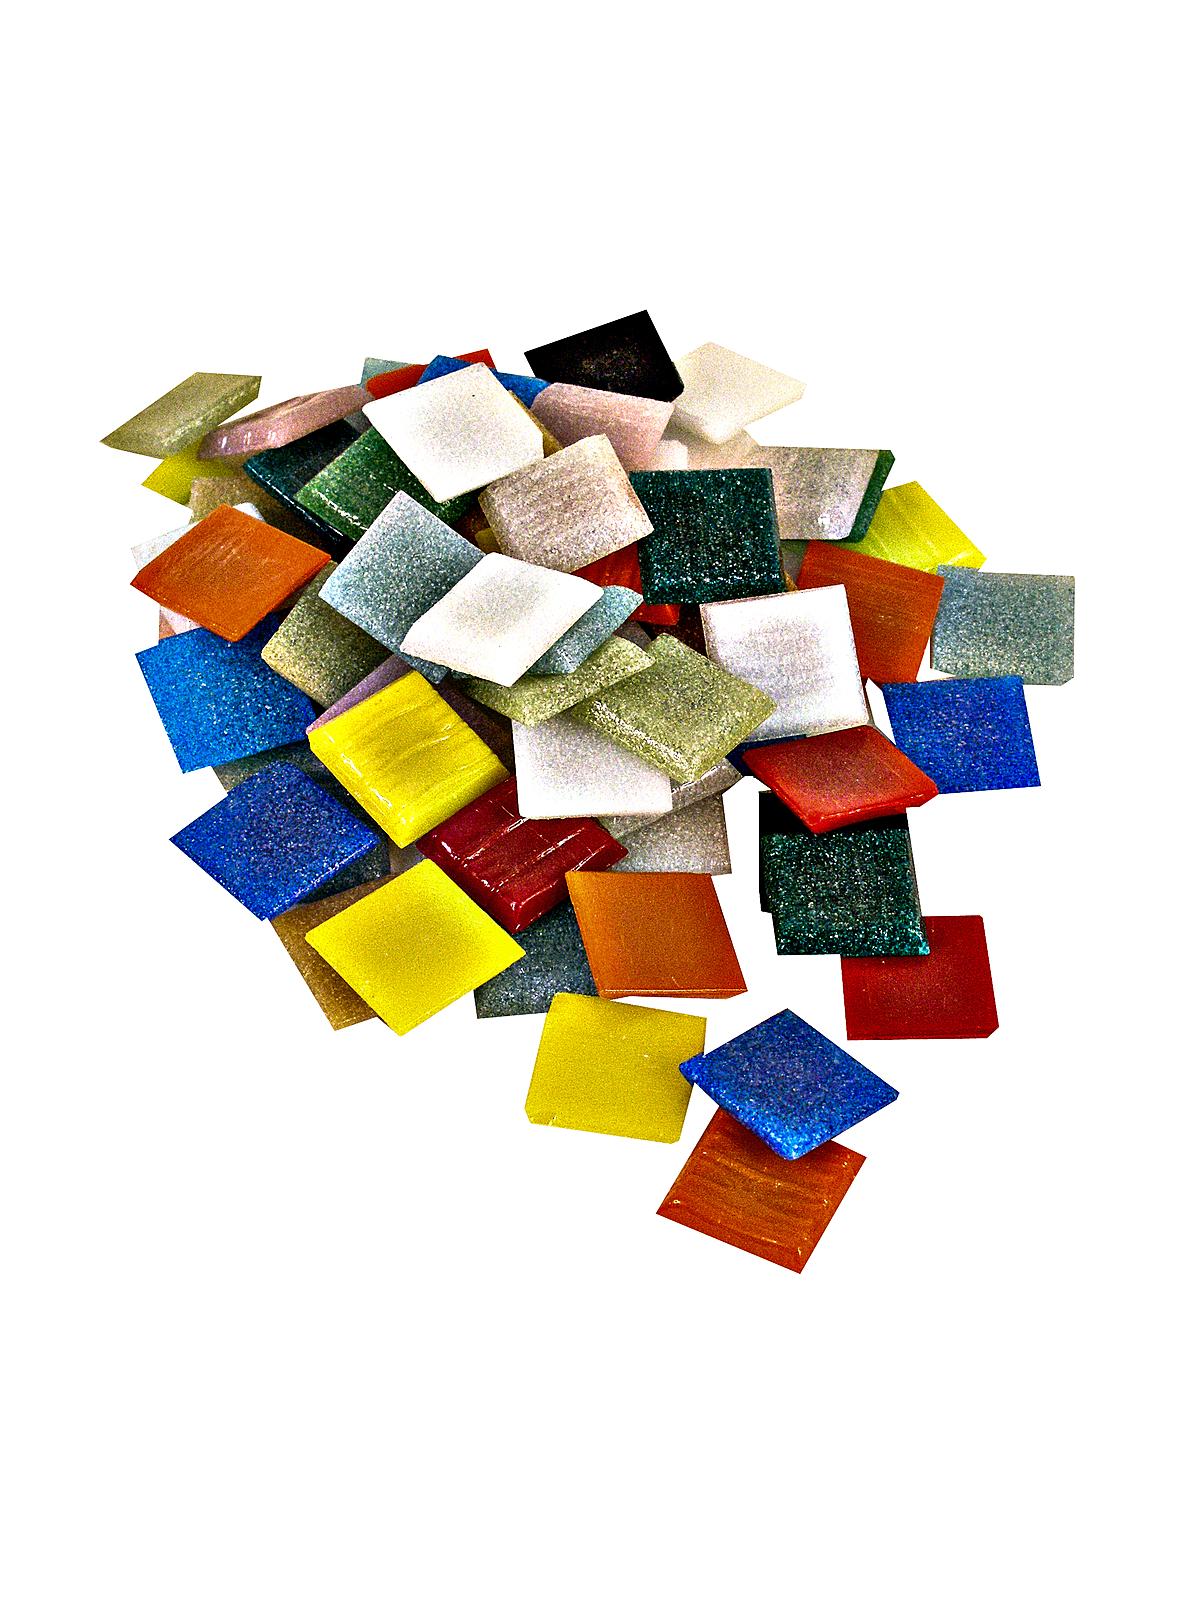 Solid Color Vitreous Glass Mosaic Tile Assorted 3 4 In. 1 2 Lb. Bag